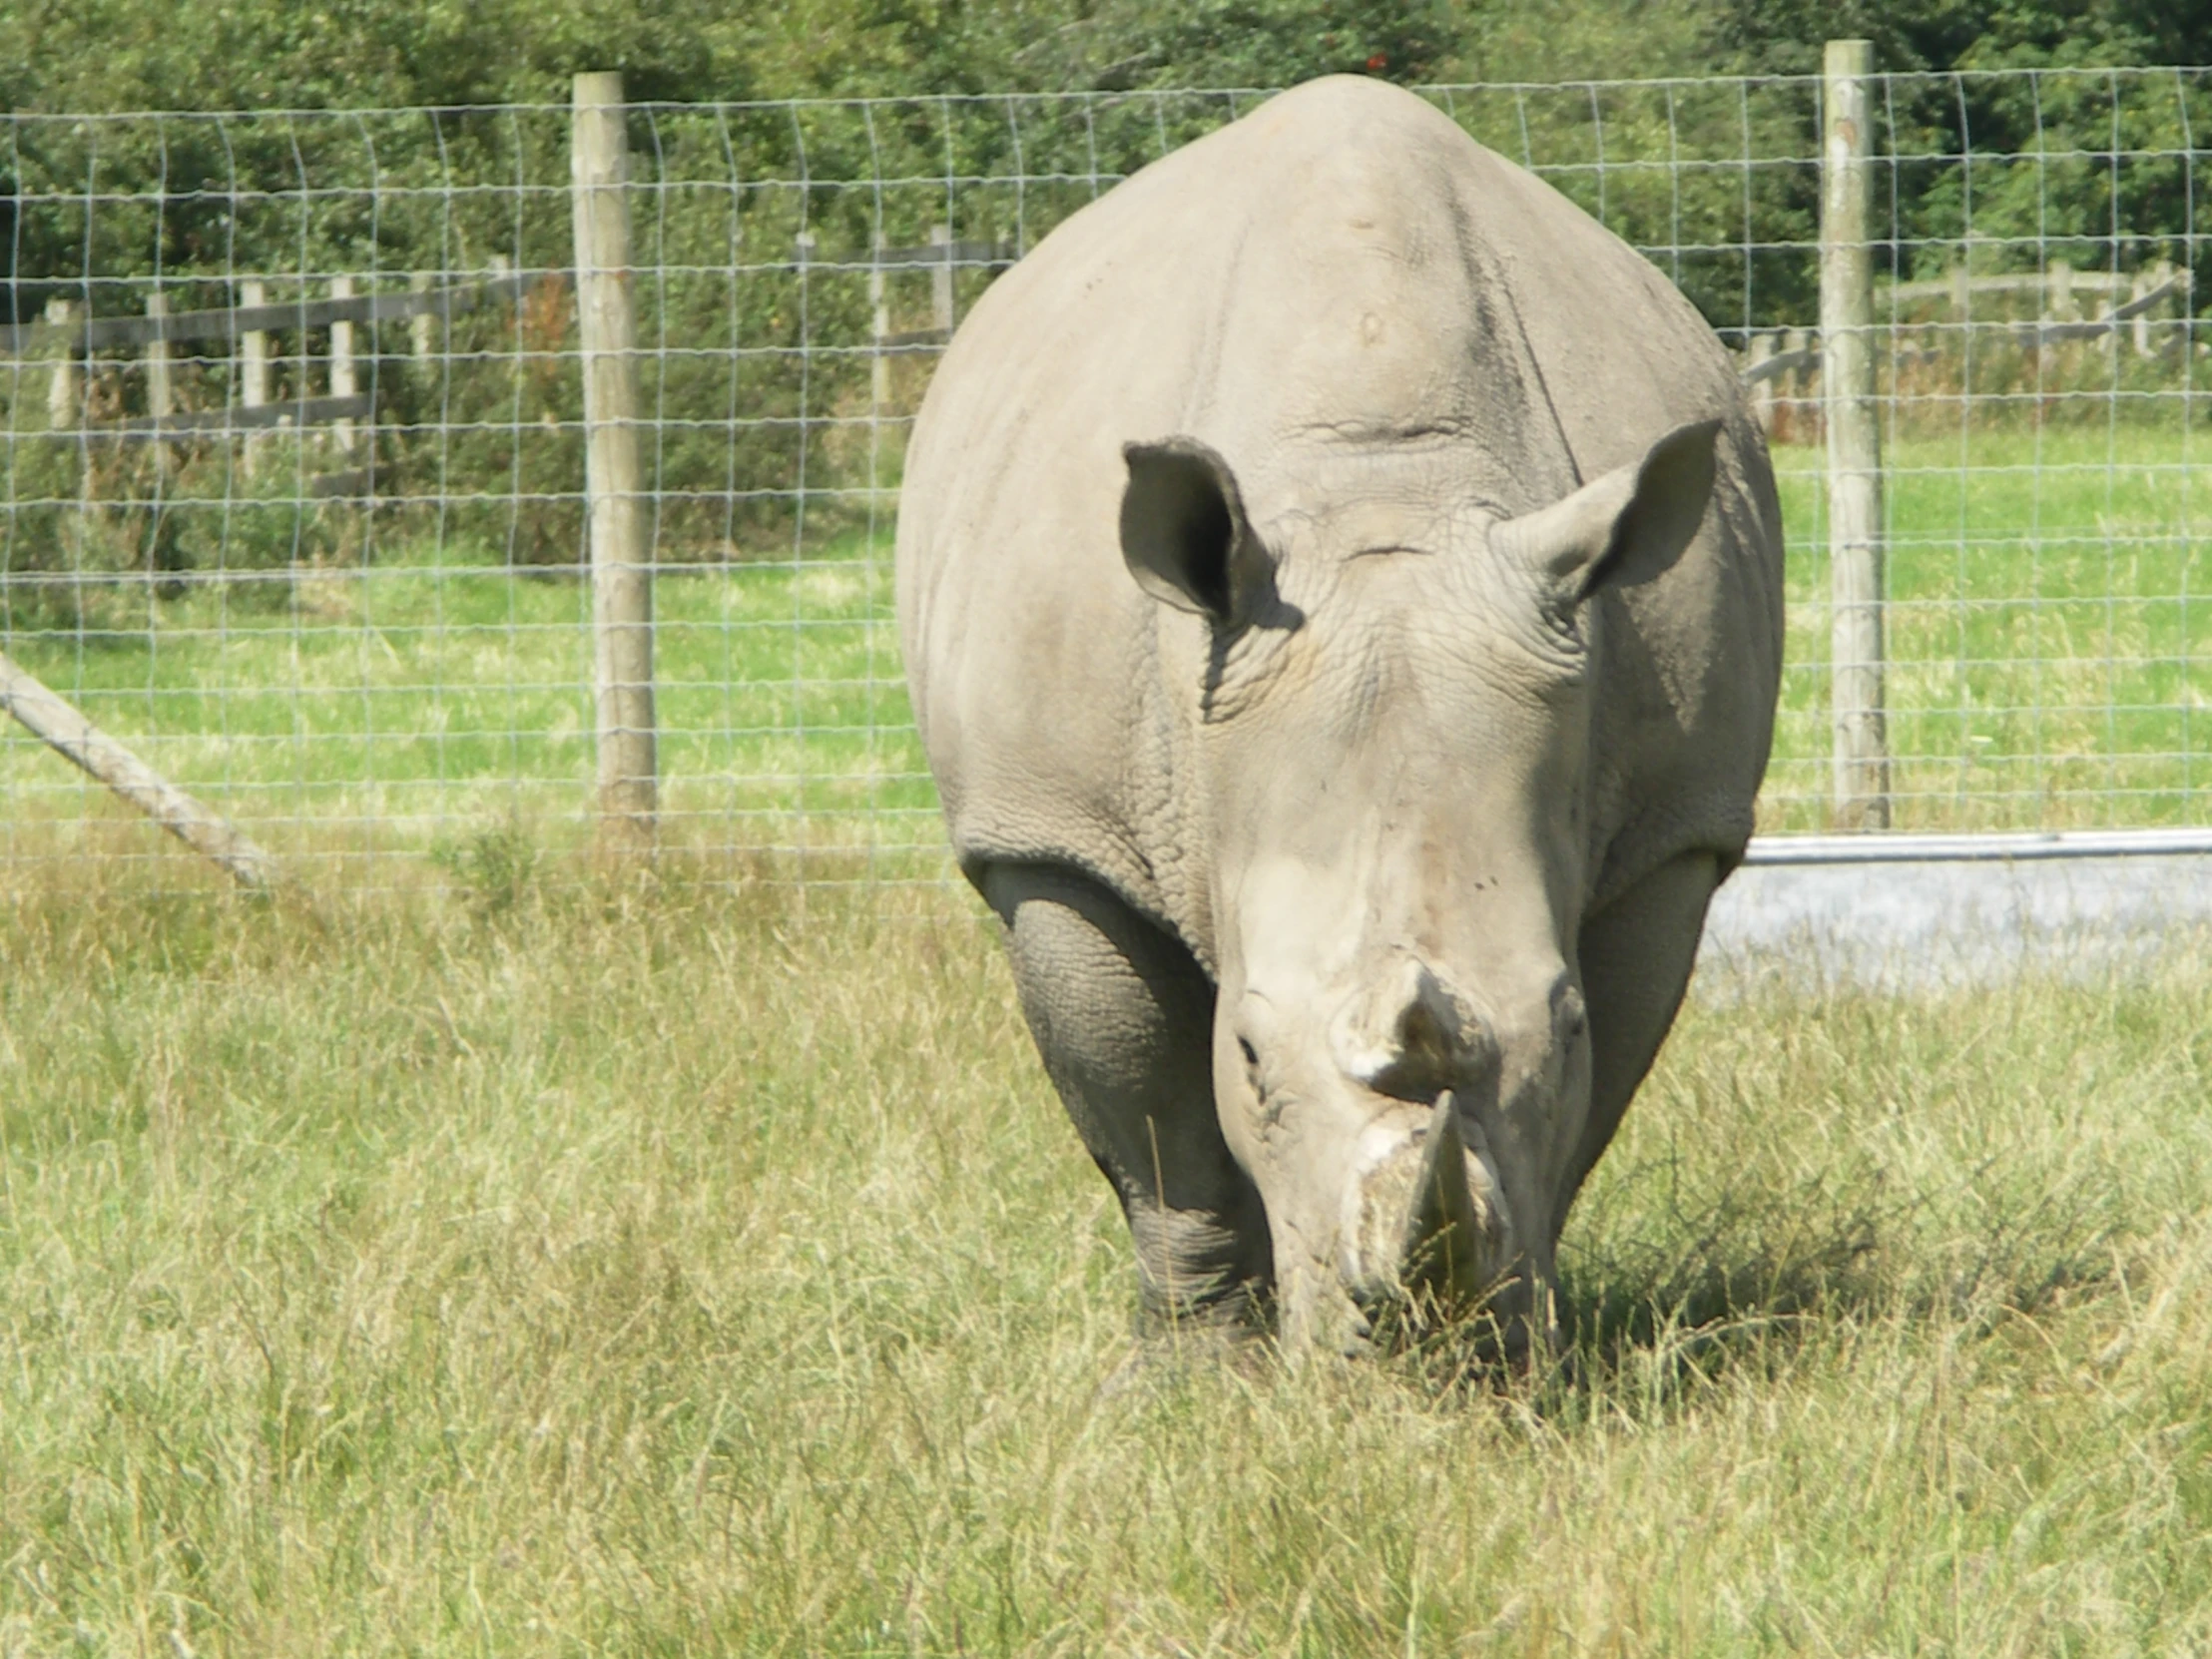 the rhinoceros are eating grass in their enclosure